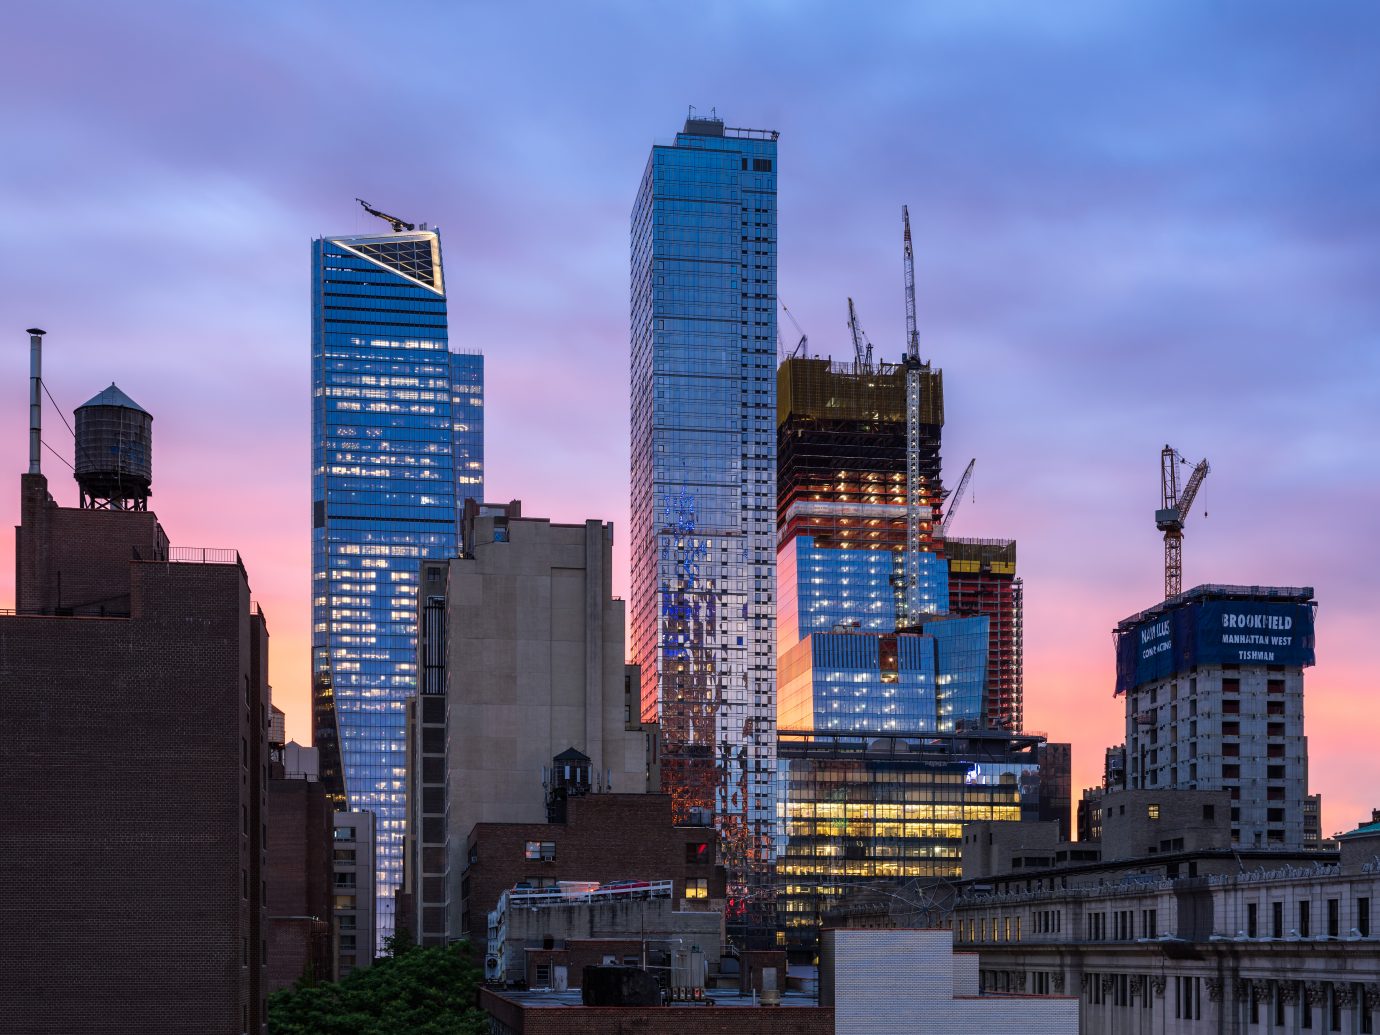 New York City, NY, USA - June 8, 2017: The Hudson Yards construction site with 30 Hudson Yards under construction, the completed 10 Hudson Yards and Eugene skyscrapers at sunset. Midtown, Manhattan